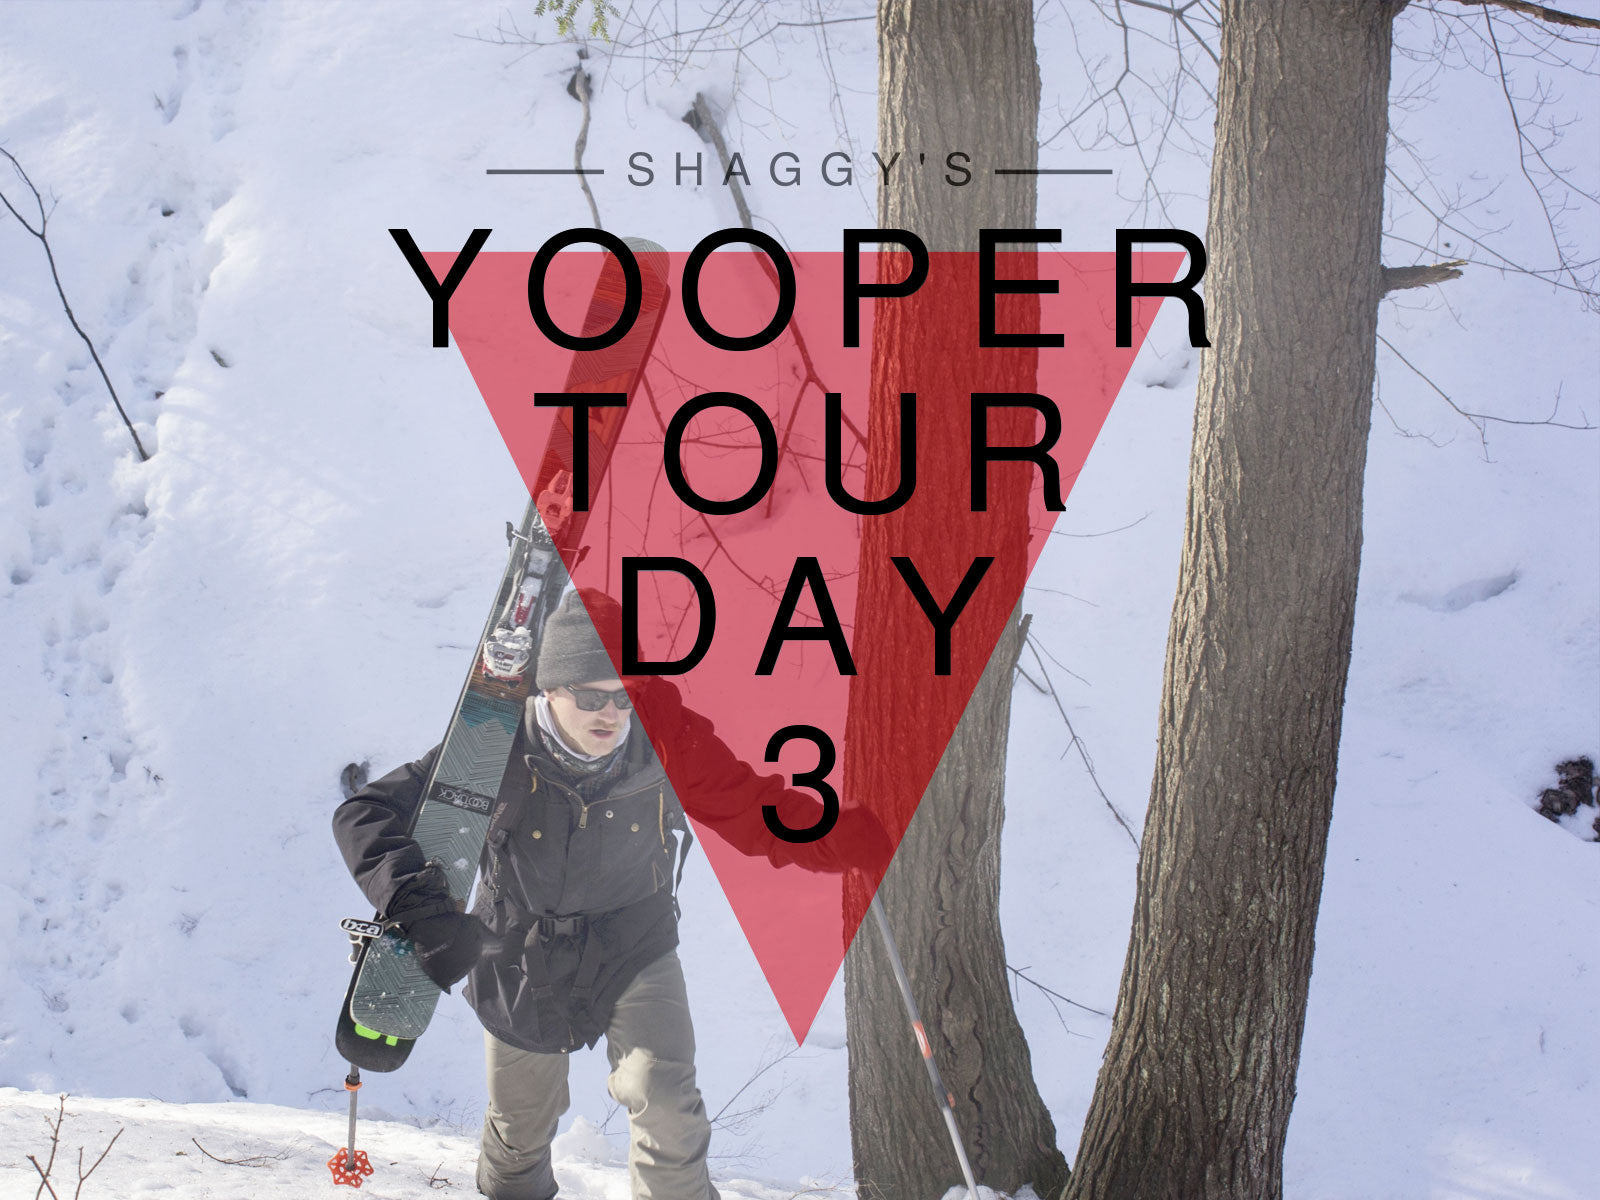 Video: Yooper Tour - Day 3 - Porcupine Mountains and South Range